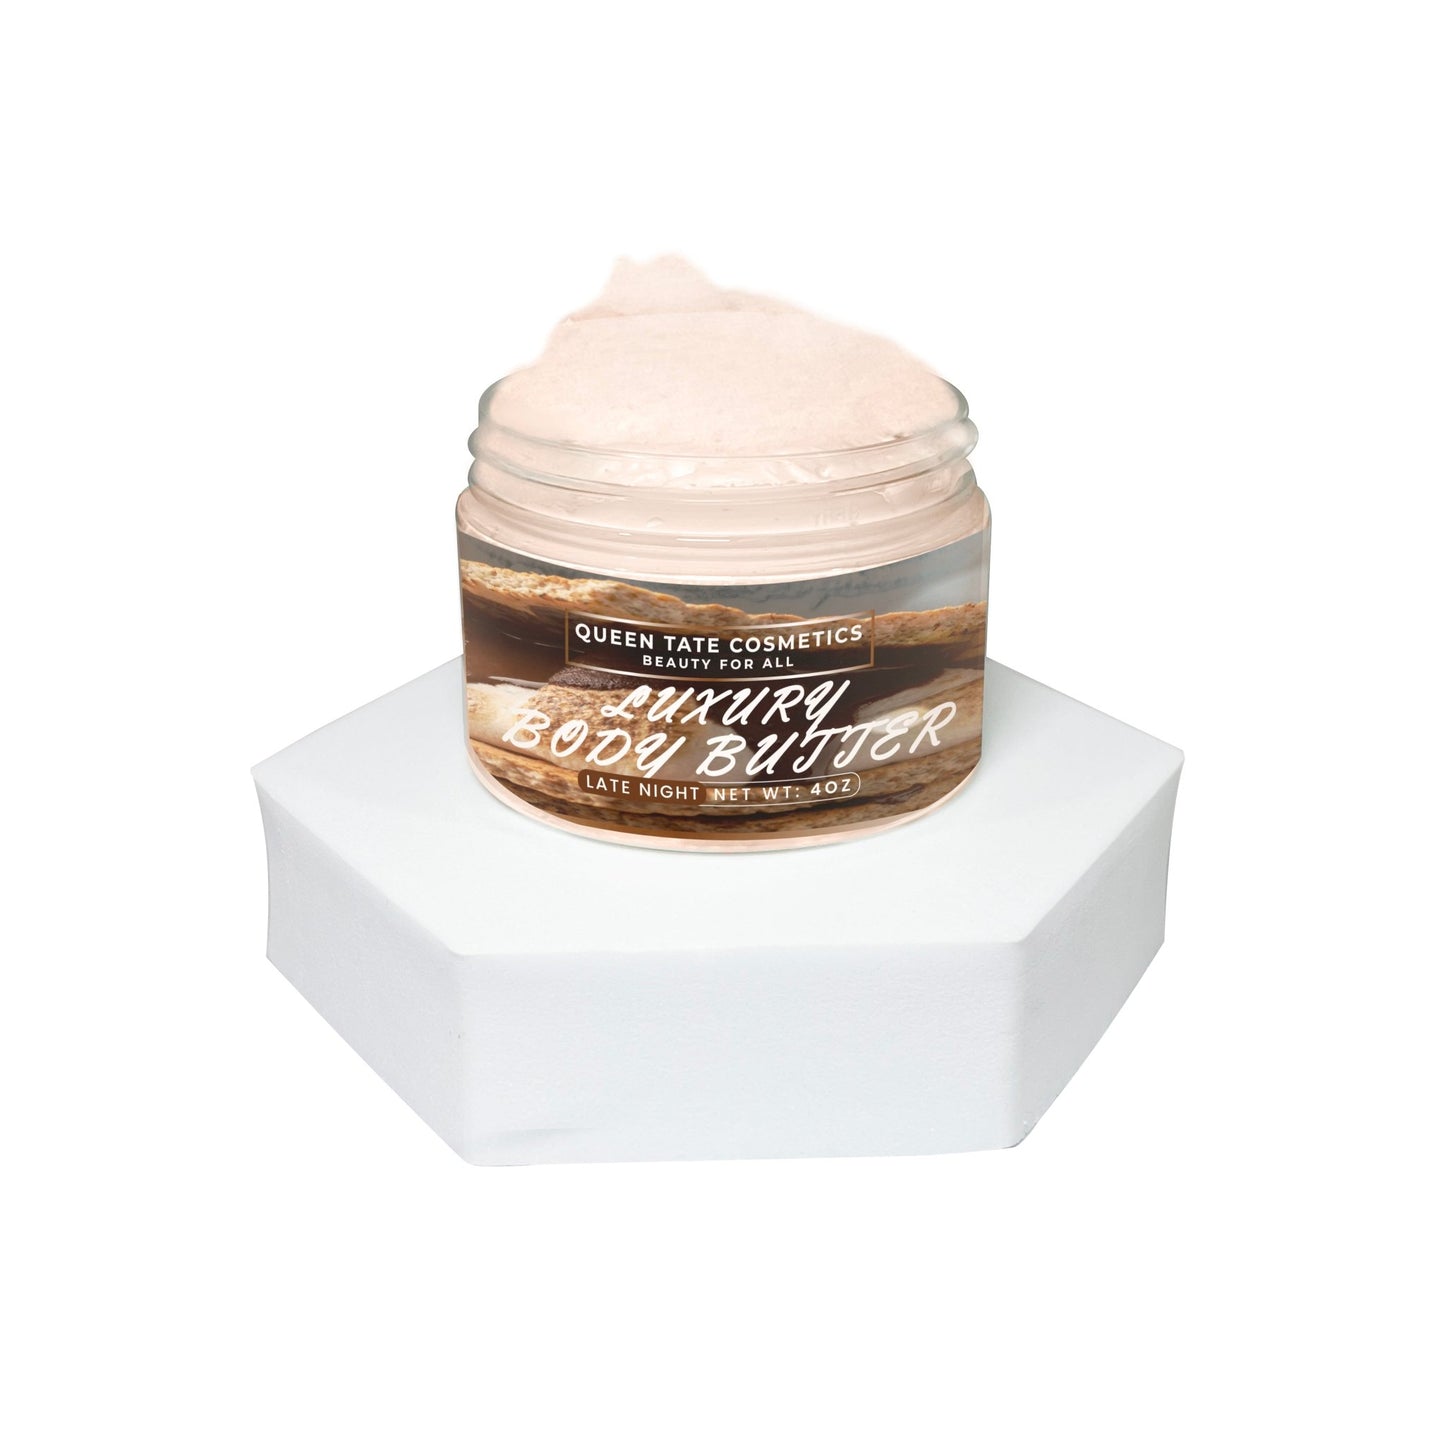 Late Night-Handcrafted Body Butter - Queen Tate CosmeticsHandcrafted Luxury Body ButterLate Night-Handcrafted Body ButterHandcrafted Luxury Body ButterQueen Tate Cosmetics 8 oz